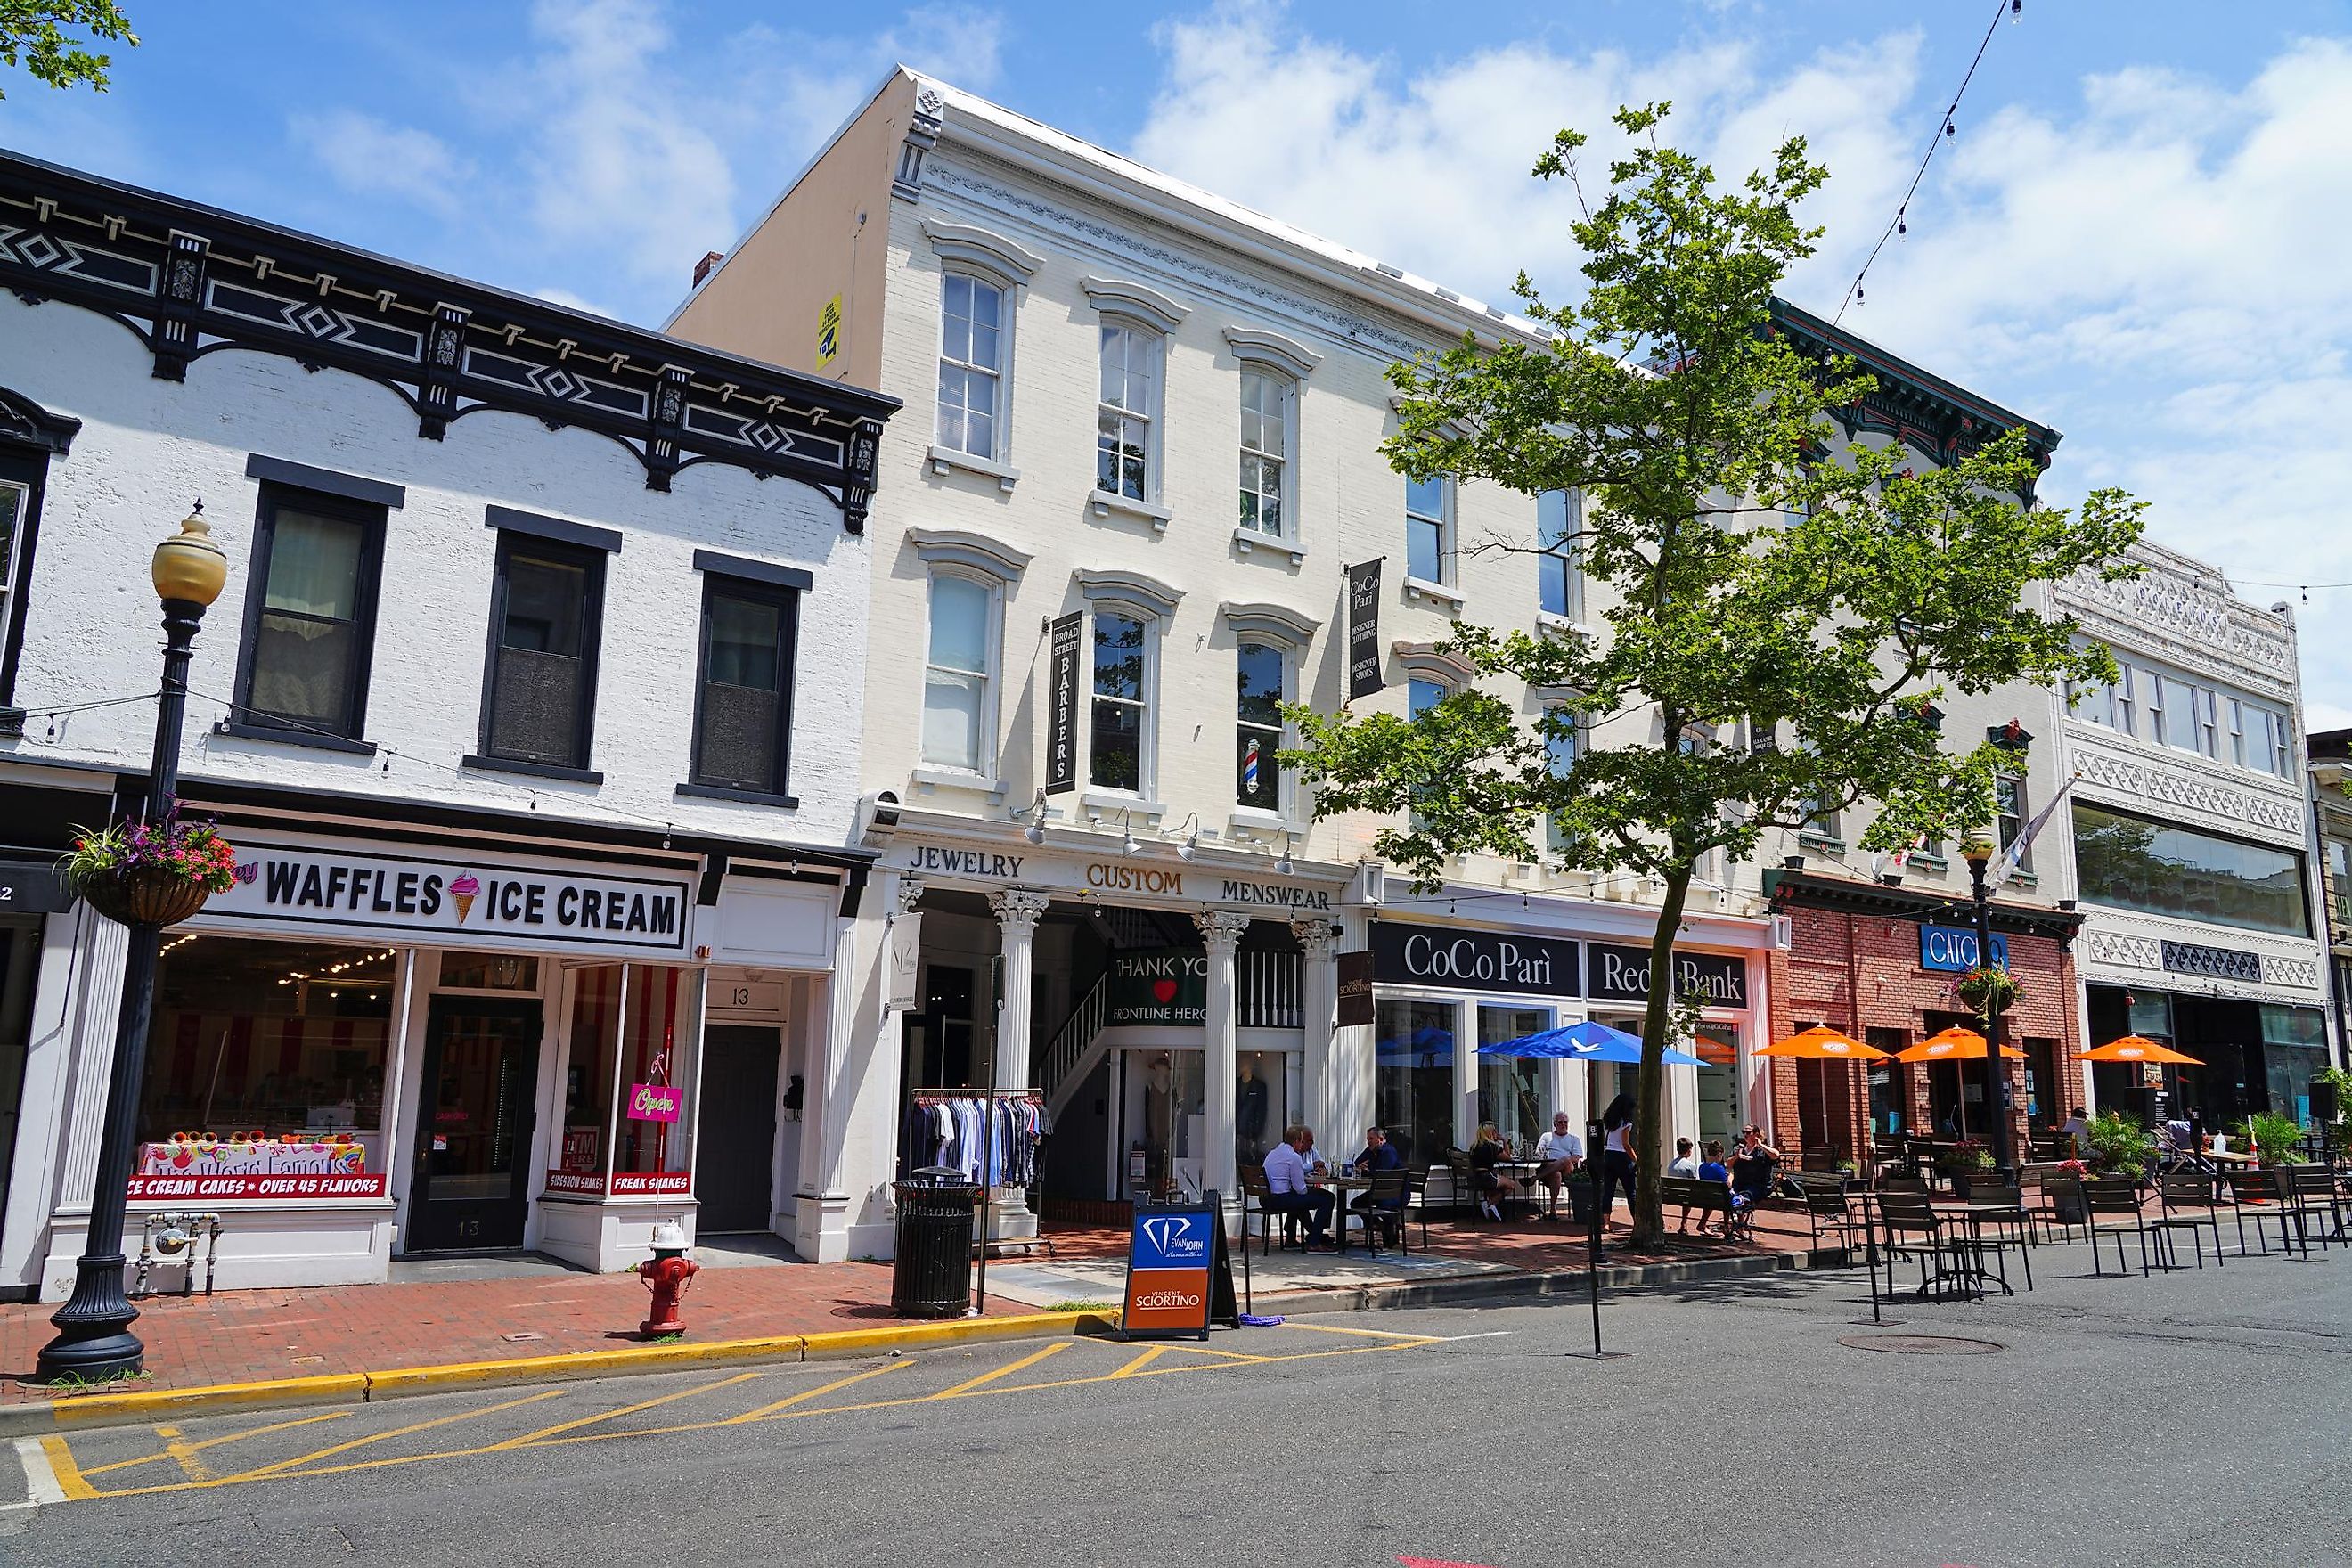 RED BANK, NJ –16 JUL 2020- View of downtown buildings on Broad Street in the town of Red Bank, Monmouth County, New Jersey.